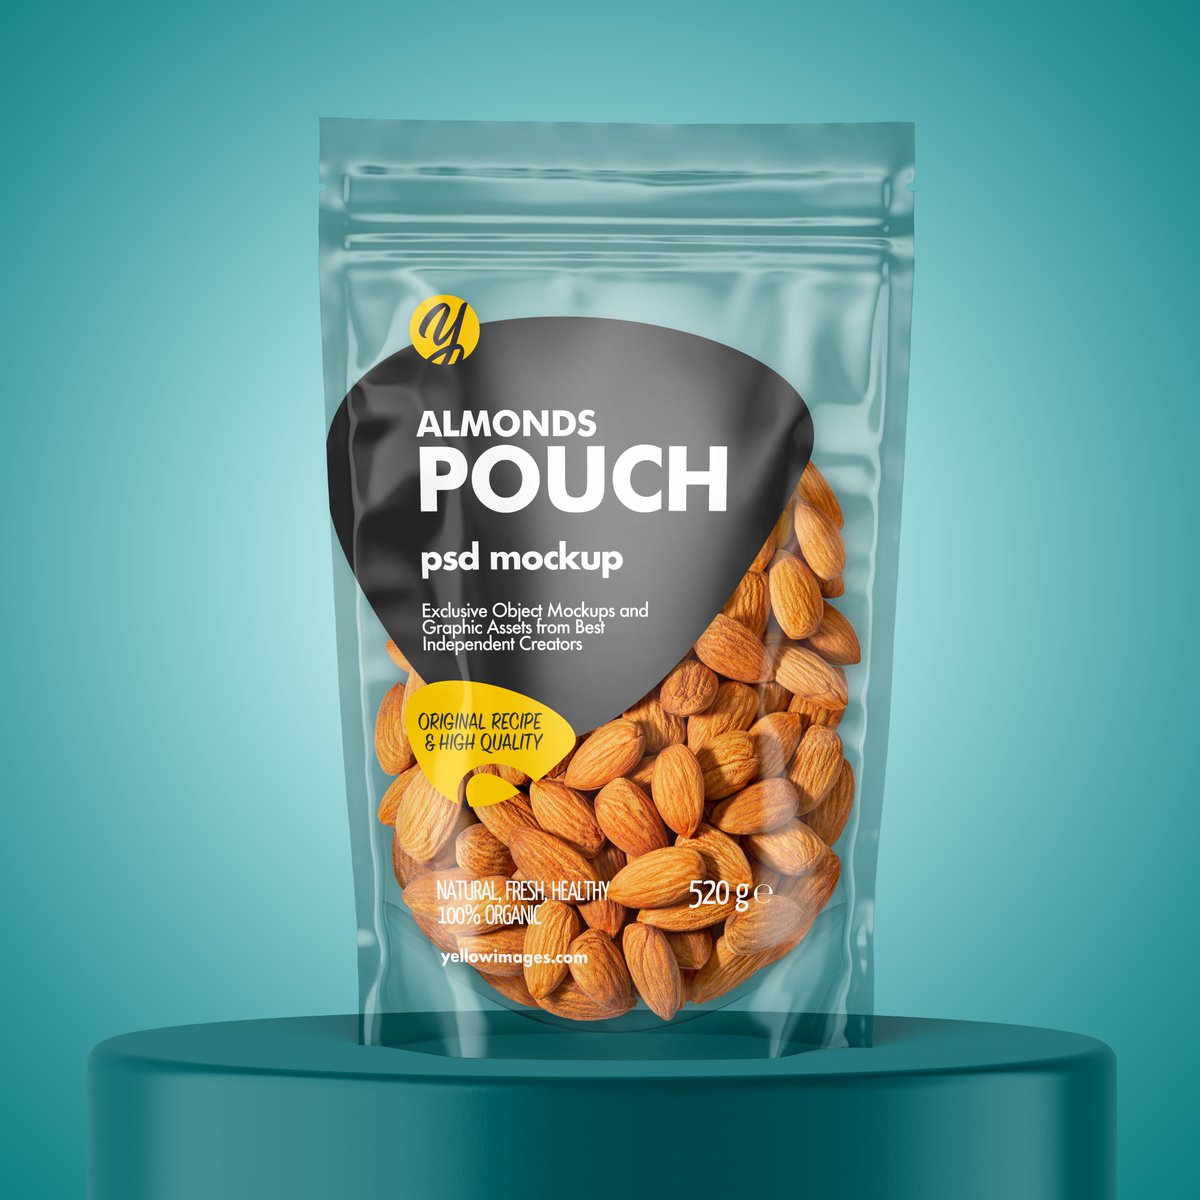 Clear Pouch w/Almond Mockup. Link: yellowimages.com/stock/clear-pl… #pouchmockup, #pouch,#mockup,#mockupdesign,#graphicdesign, #graphic,#design,#labeldesign,#label,#branding,#brand,#pack,#packagingdesign,#packaging,#psdmockup,#almond,#almonds,#almondmockup, #brandidentity,#identity